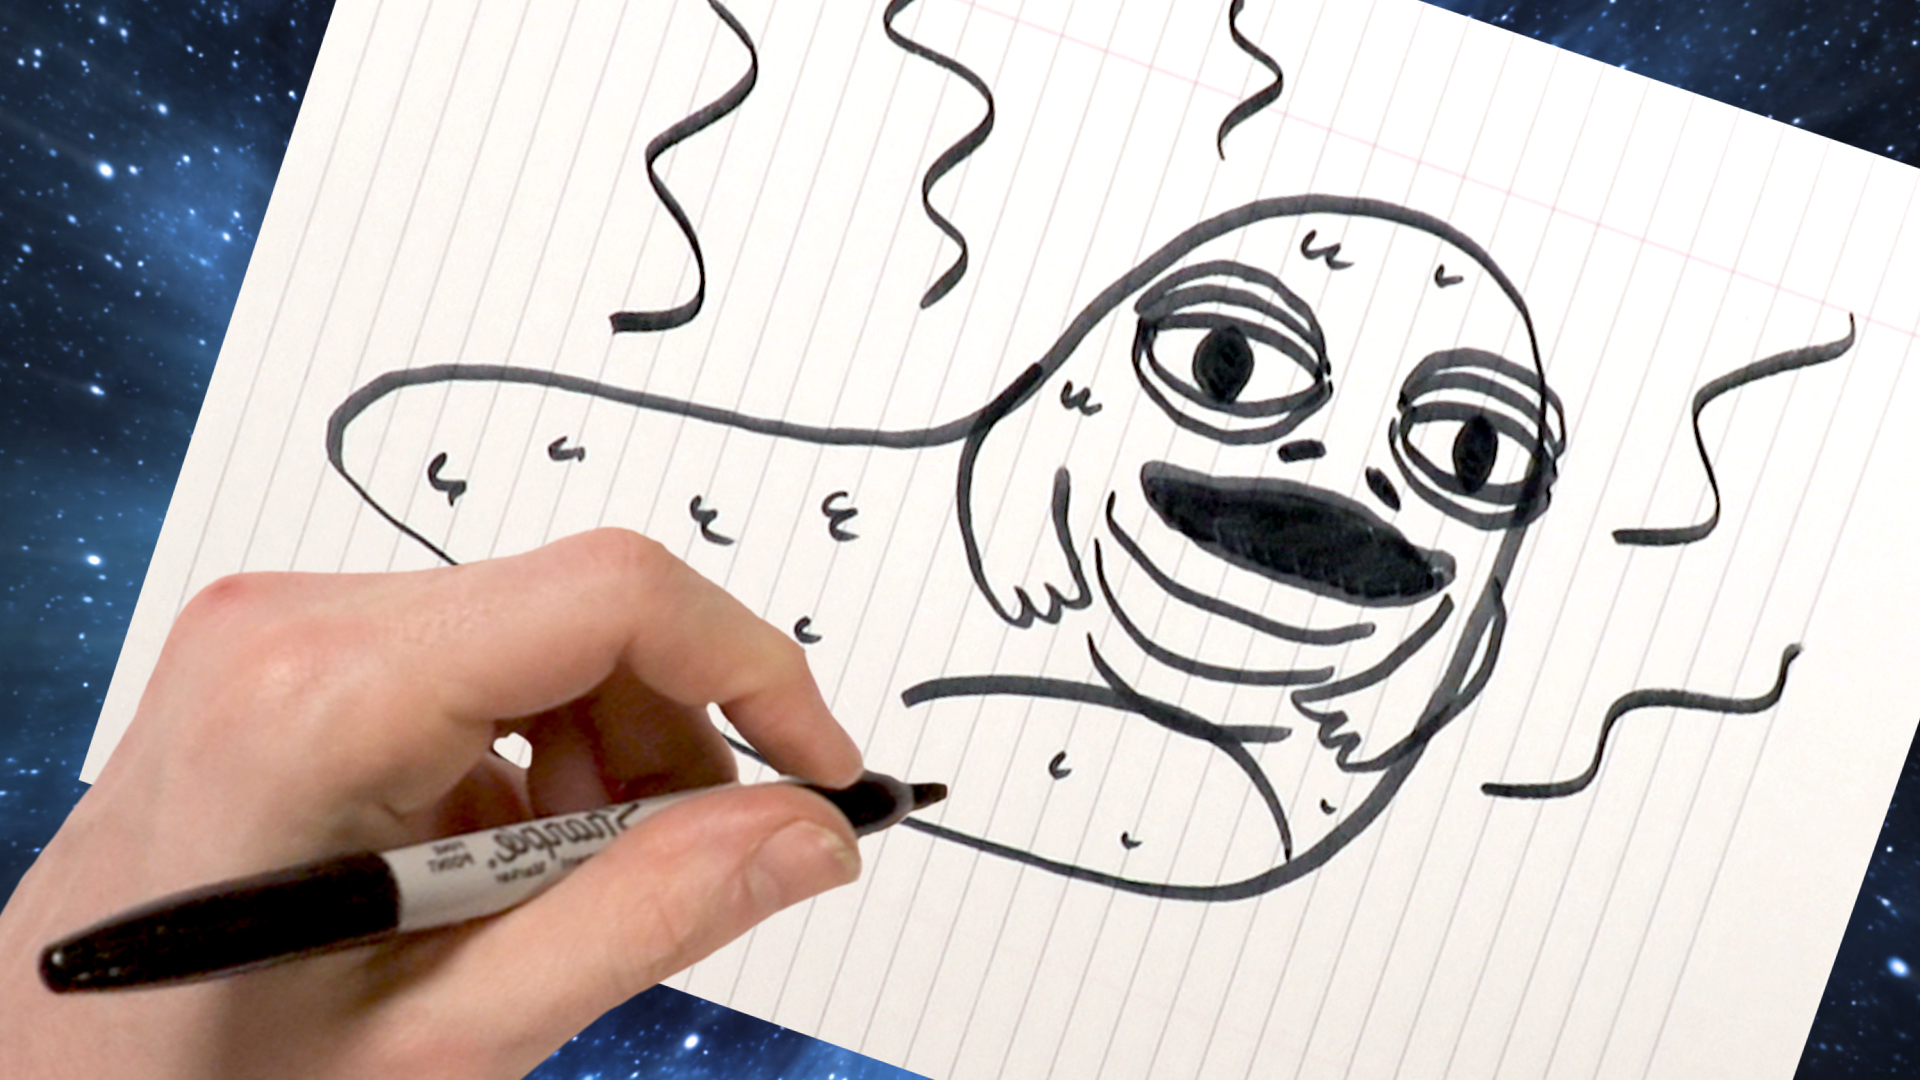 Jabba being drawing in outer space